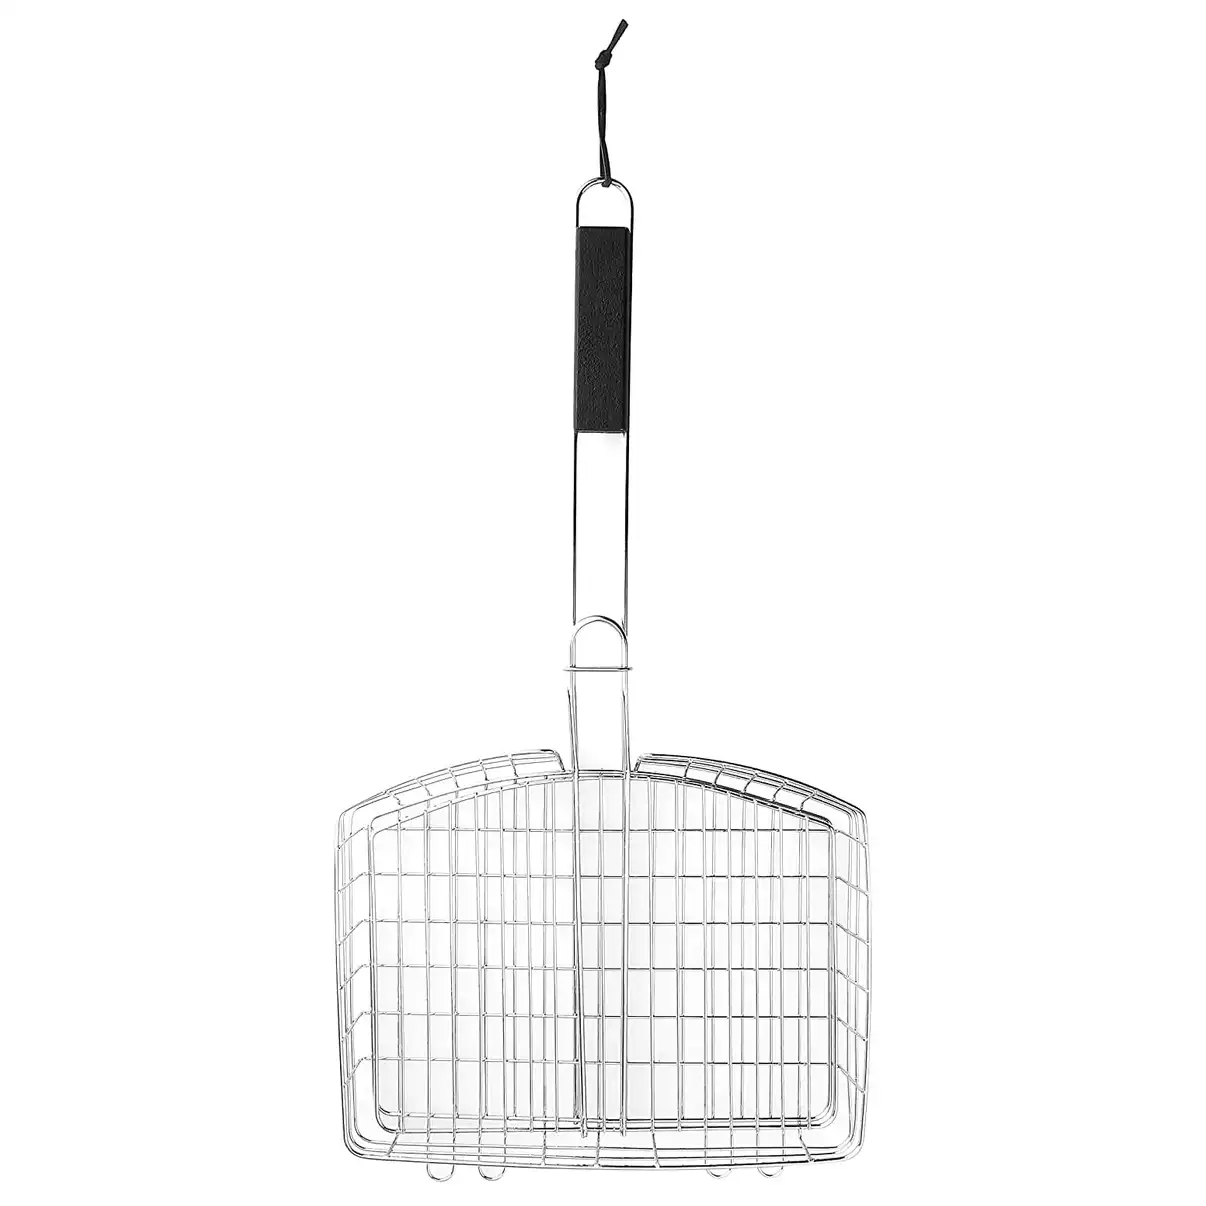 saborr-barbeque-grill-mesh-brg2005-156416_540x